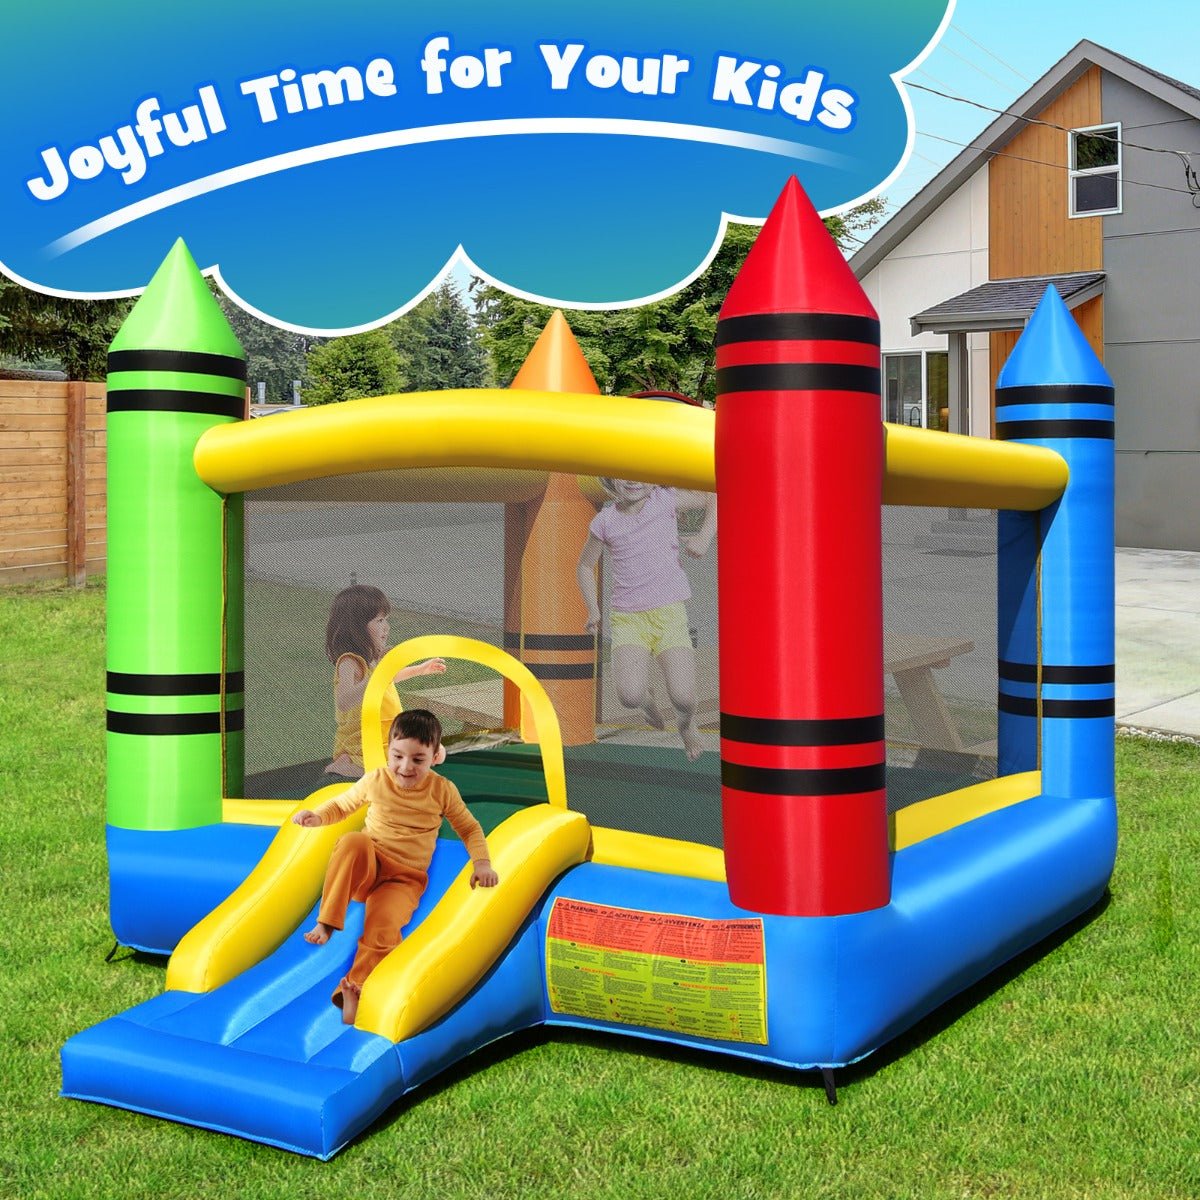 Boundless Fun: Inflatable Bounce House with Slide for Kids Playtime